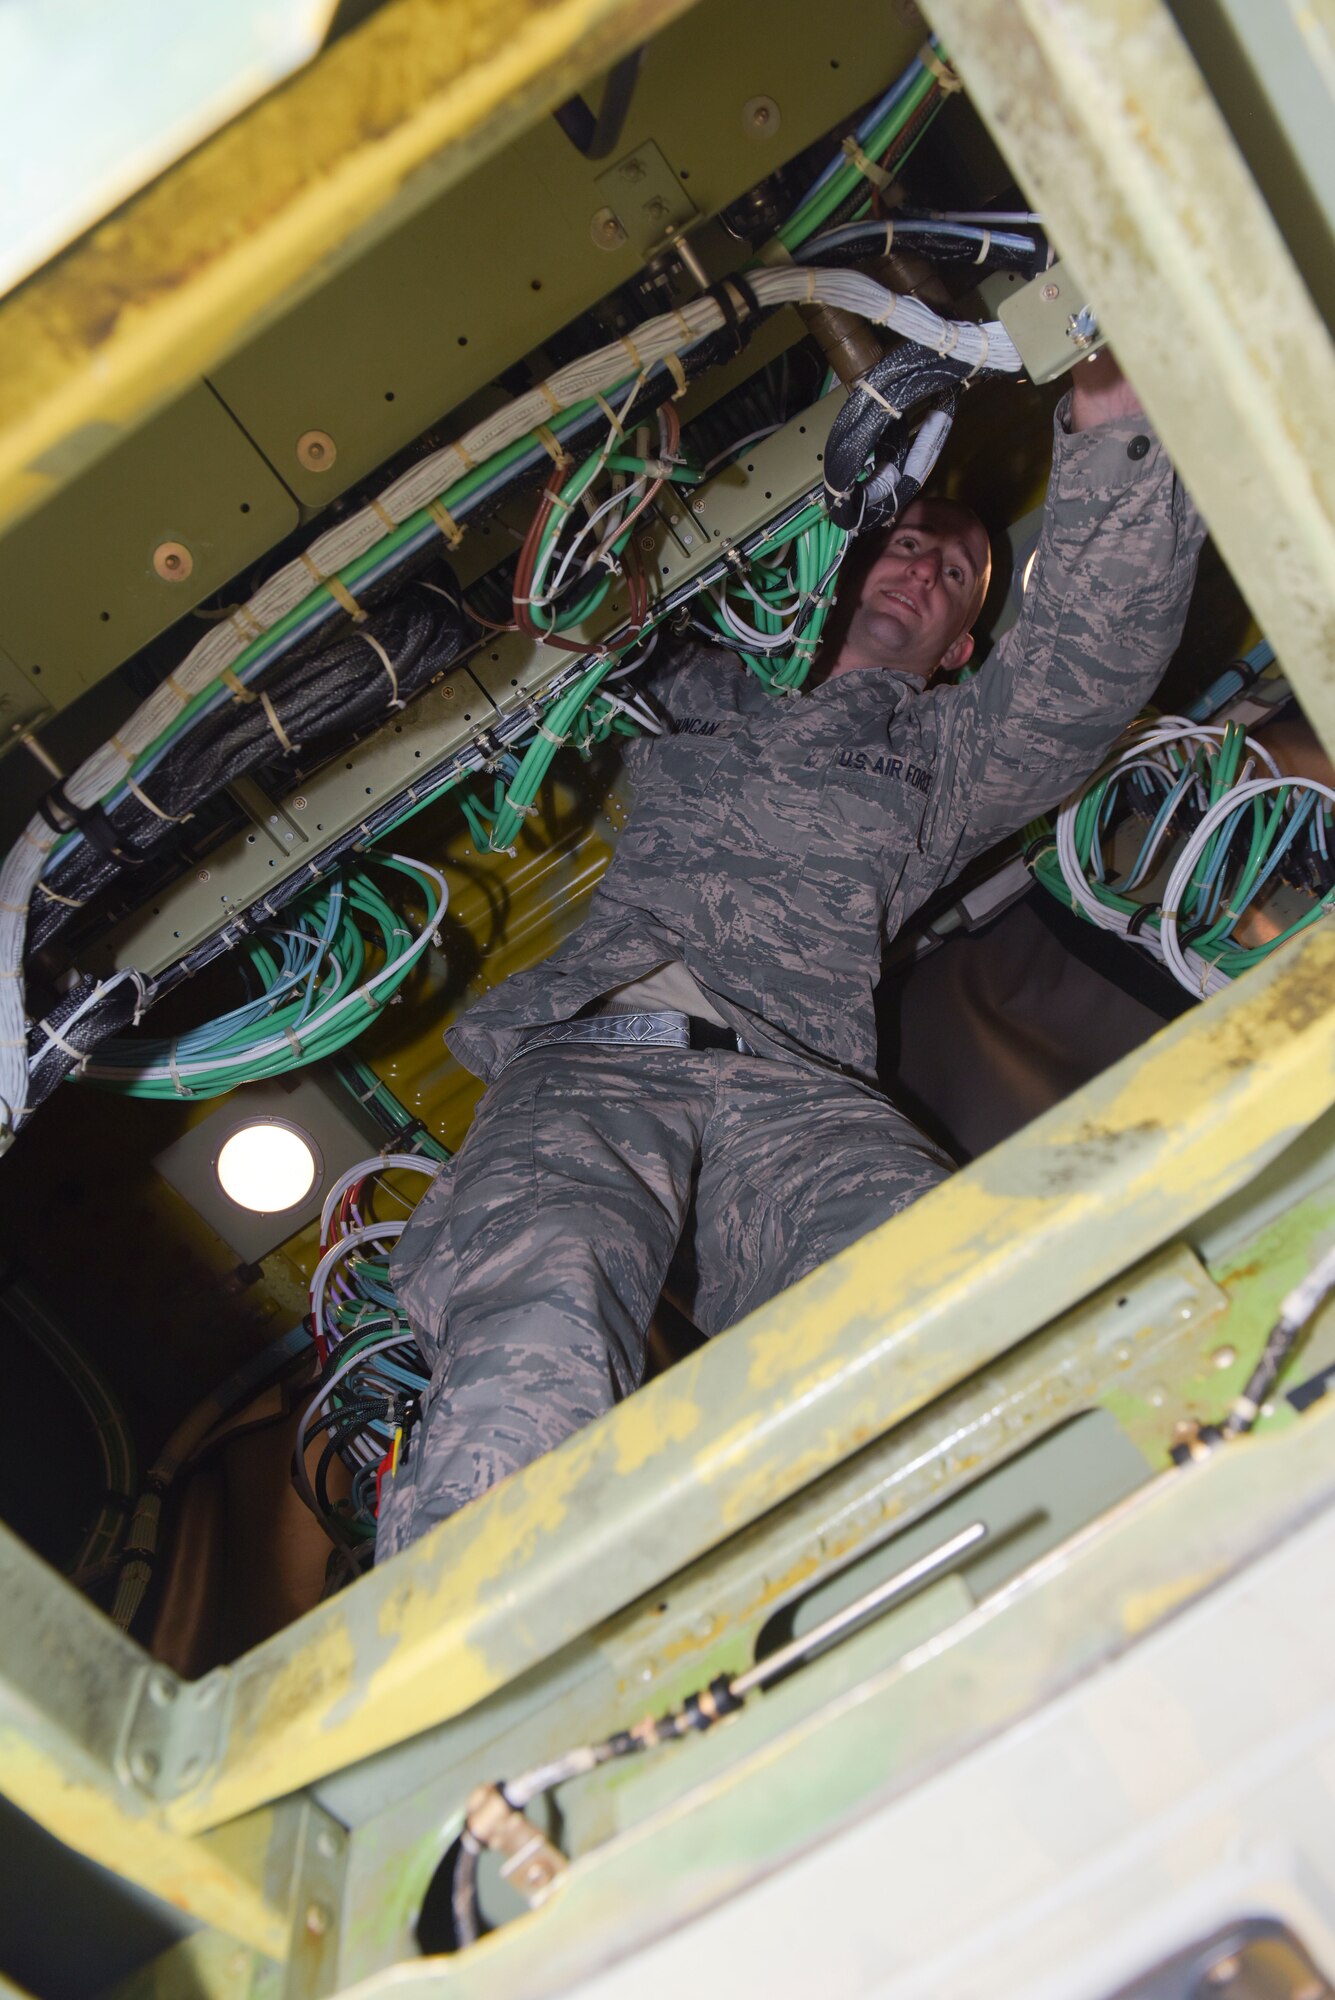 U.S. Air Force Staff Sgt. Randy Duncan, 95th Reconnaissance Squadron RC-135 electronic warfare craftsman, repairs the power distribution for a RC-135 Rivet Joint connection system at RAF Mildenhall, England, Oct. 16, 2018.